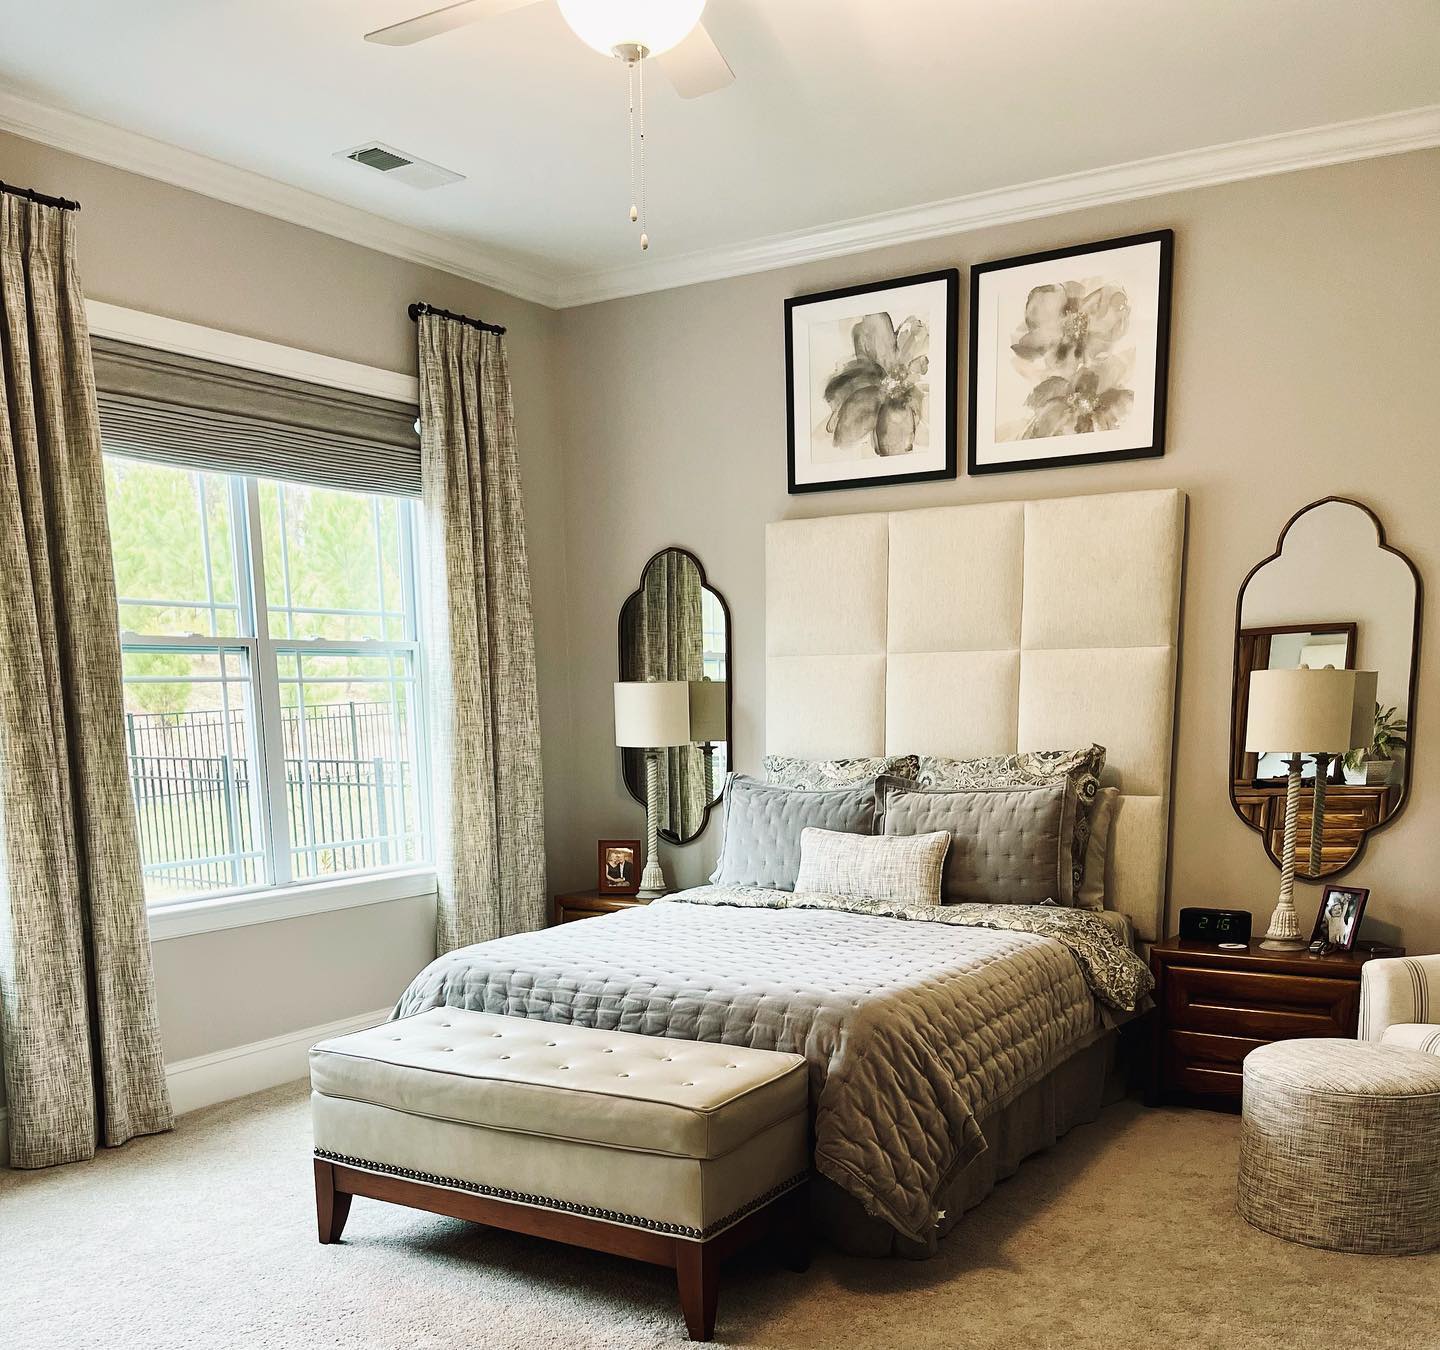 A completed bedroom design project featuring a custom headboard and window treatments by interior designer, Lori Savio